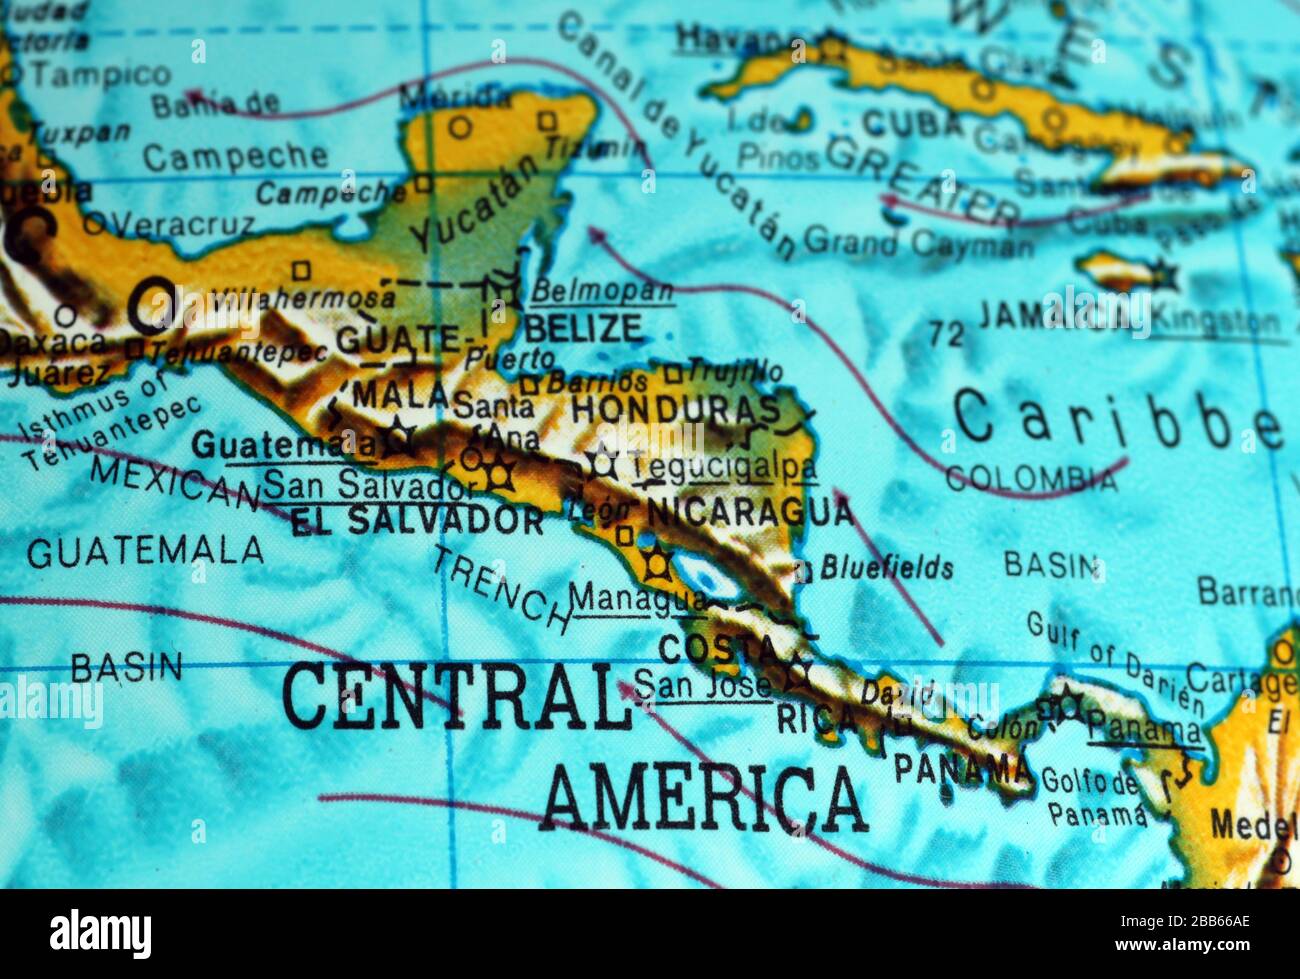 Central America map on old atlas Stock Photo